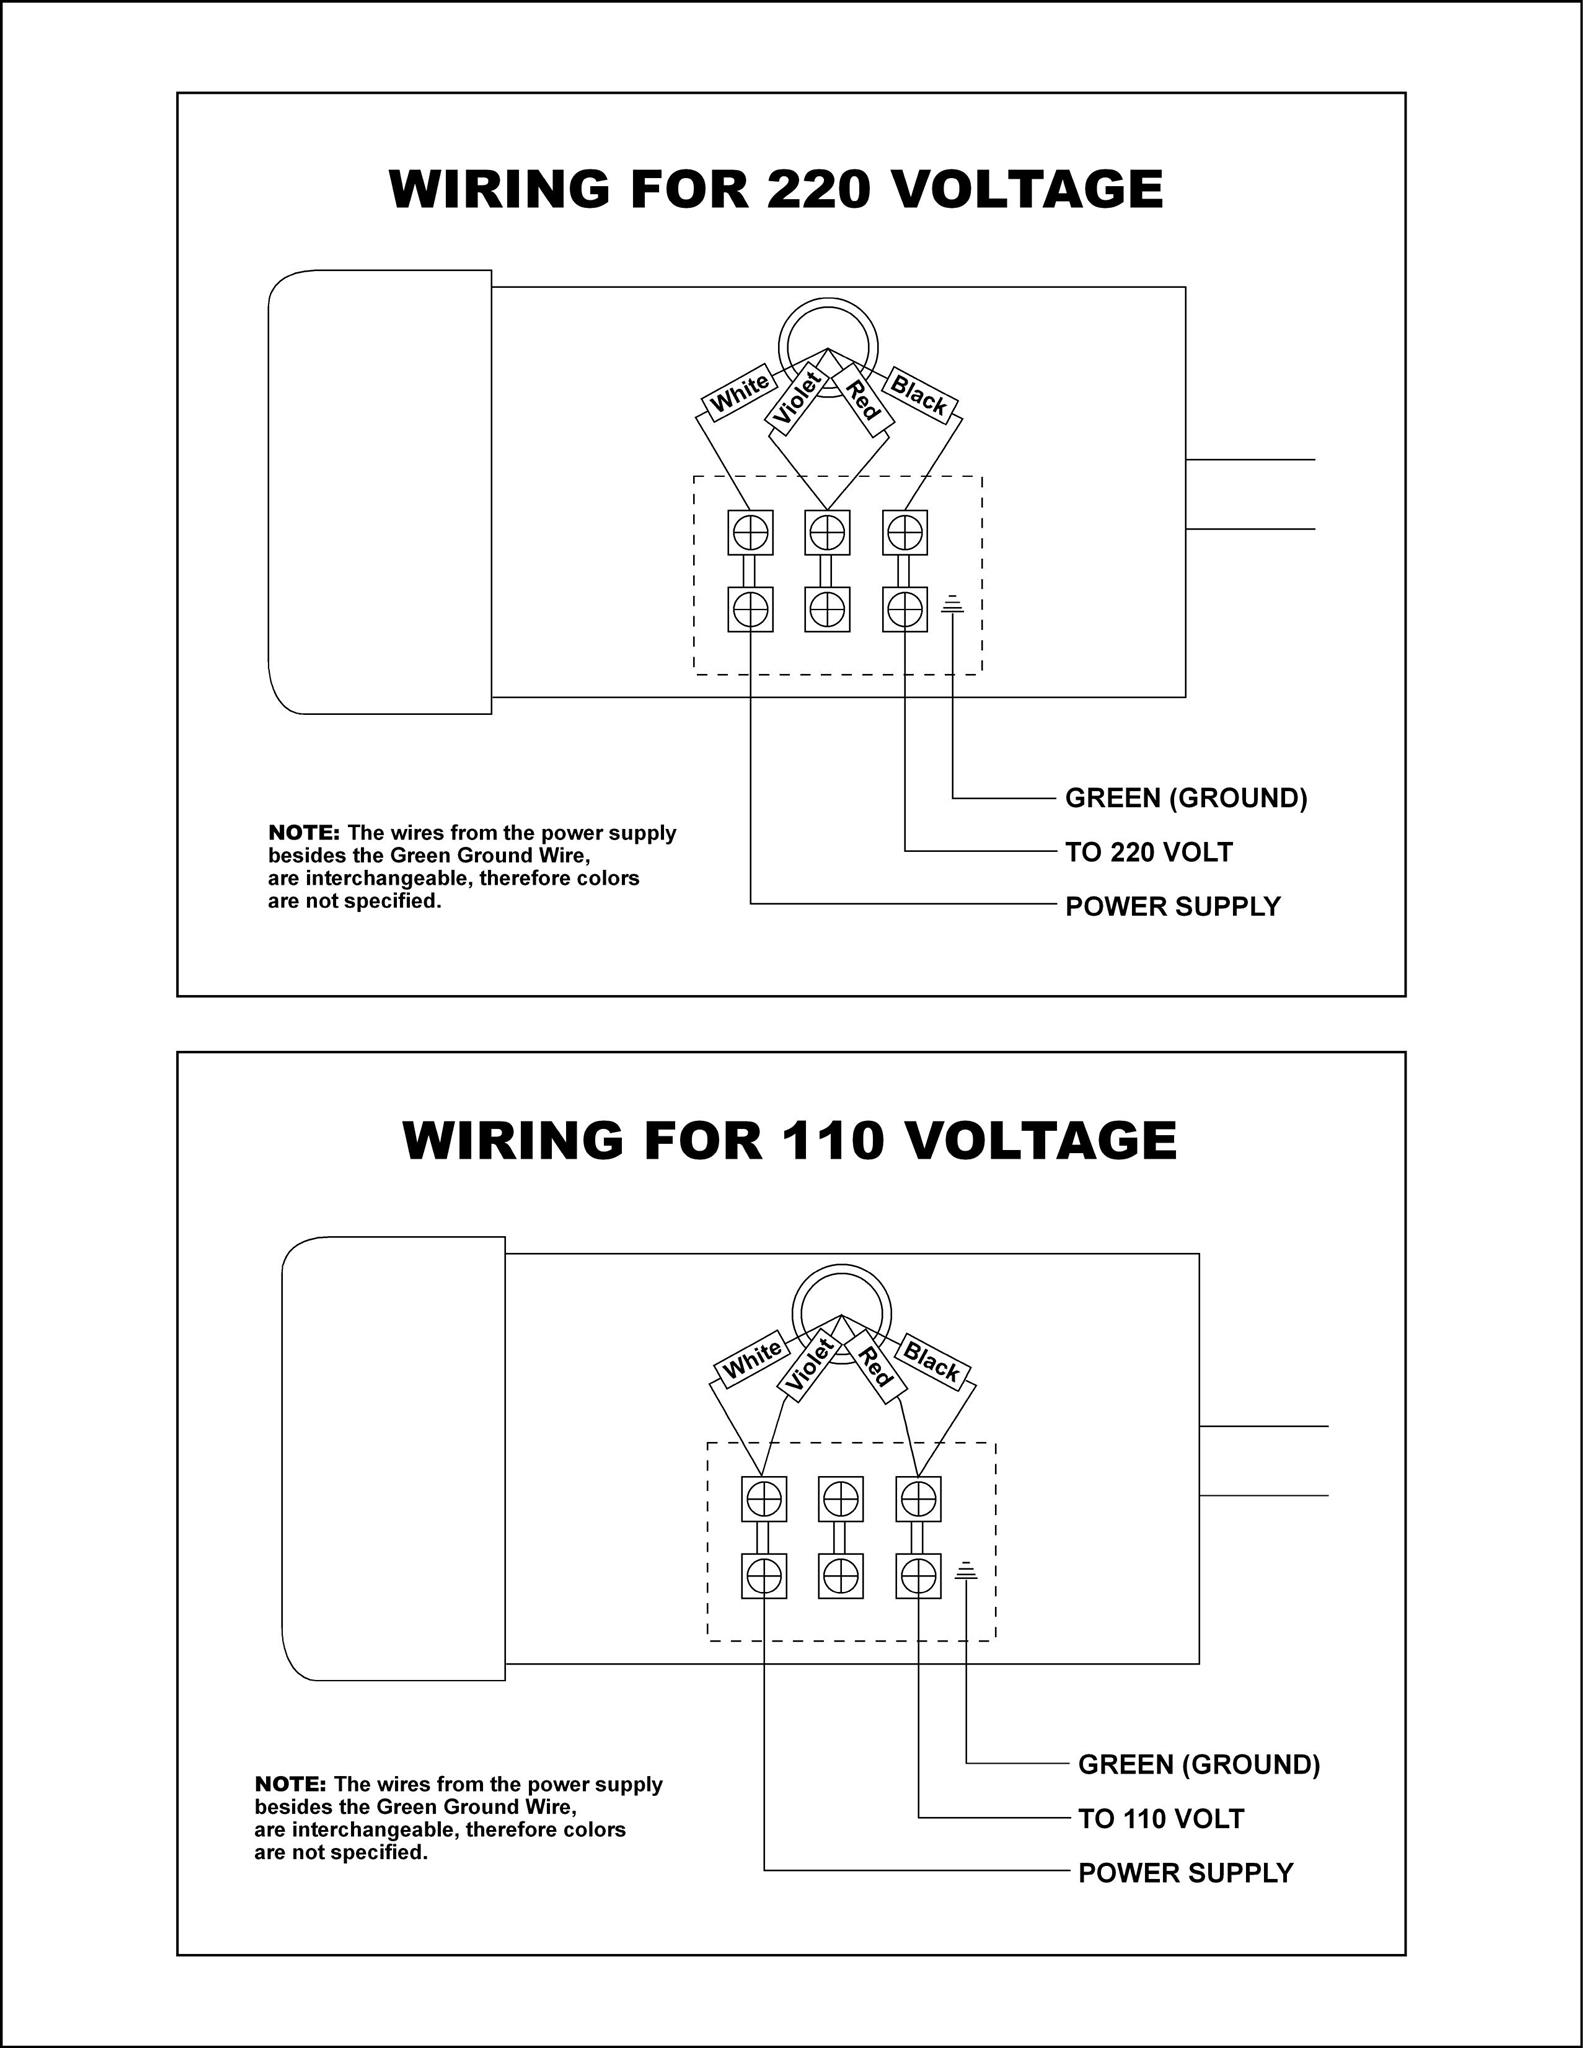 Wiring Diagram For 220v Dust Collector - Wiring Diagram and Schematic Role